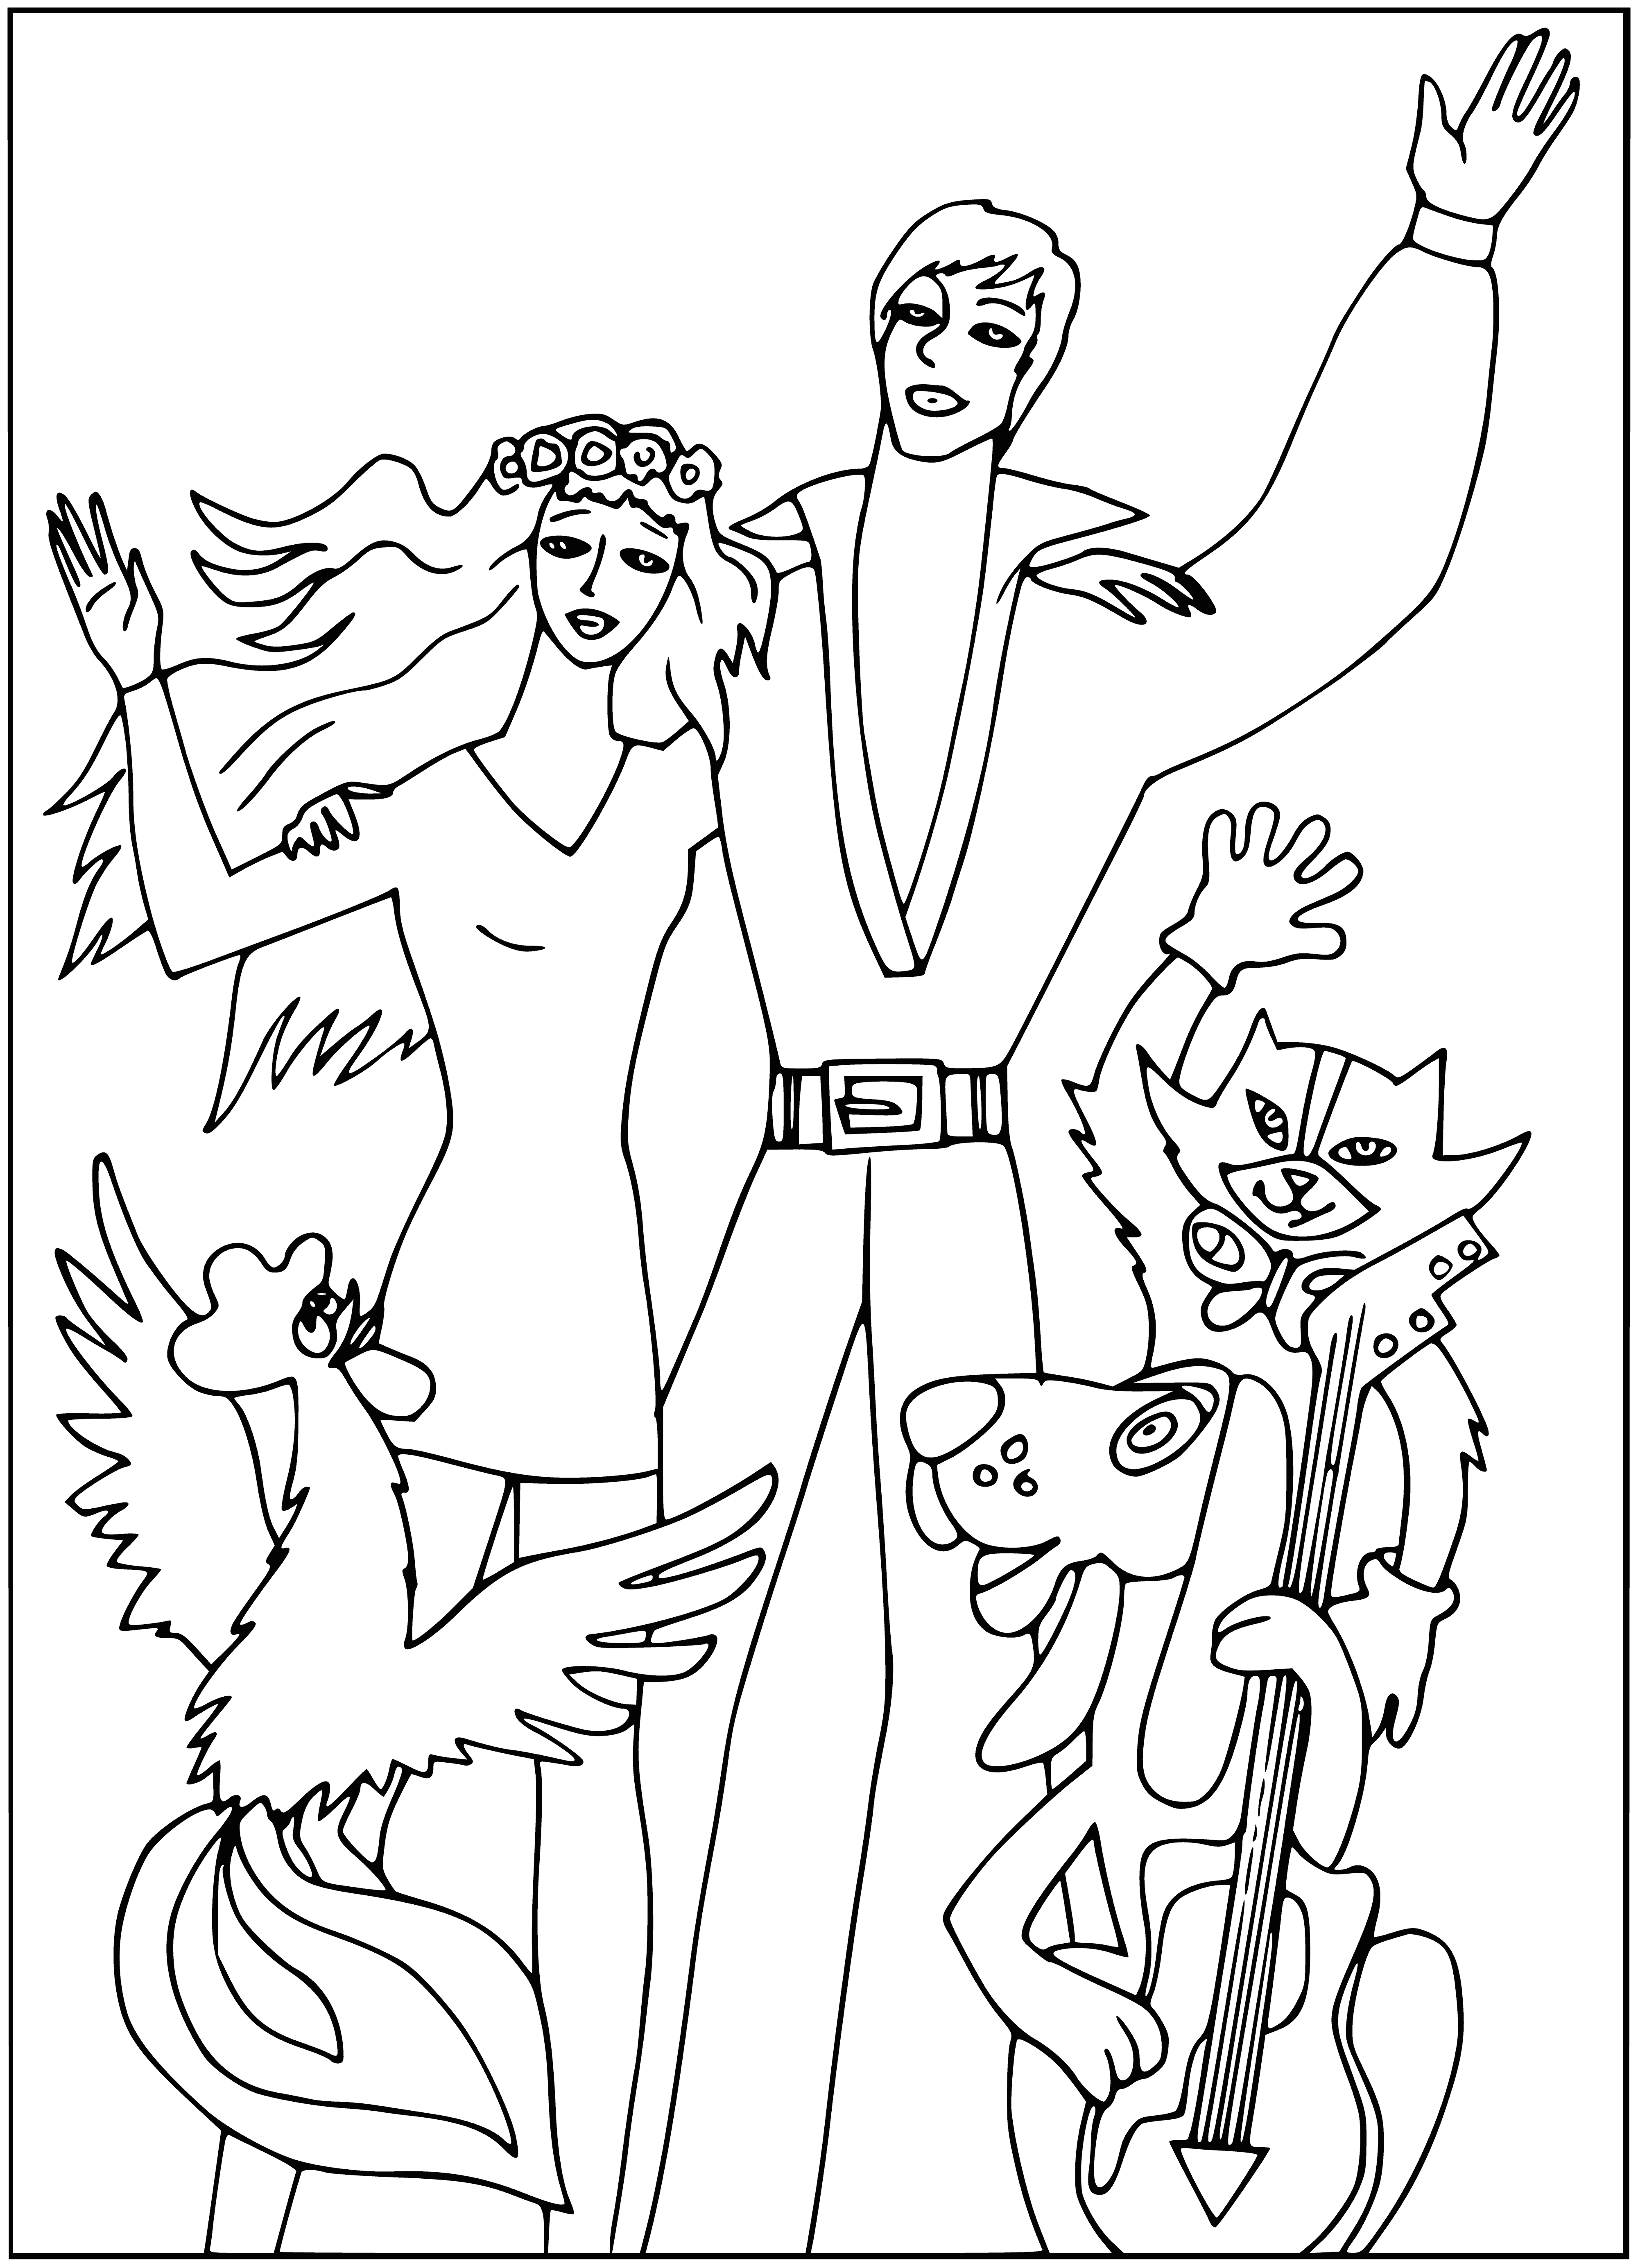 coloring page: Four happy animals cozy together in the stable: a donkey, dog, cat, and rooster.